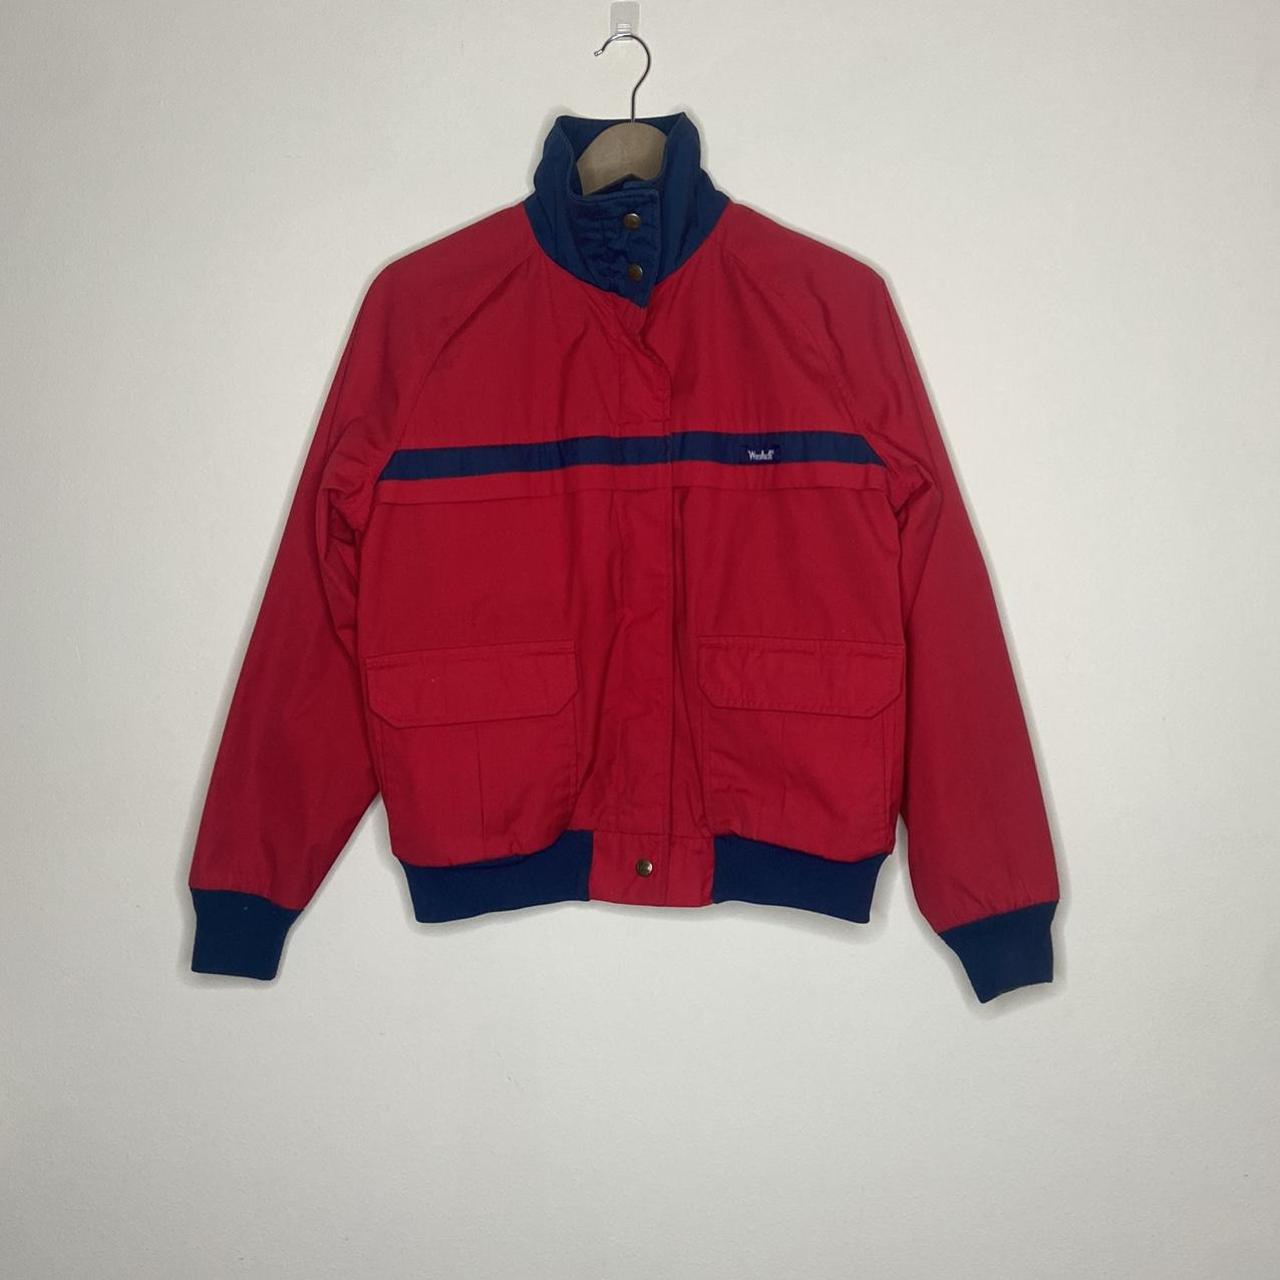 Woolrich Men's Red and Navy Jacket | Depop